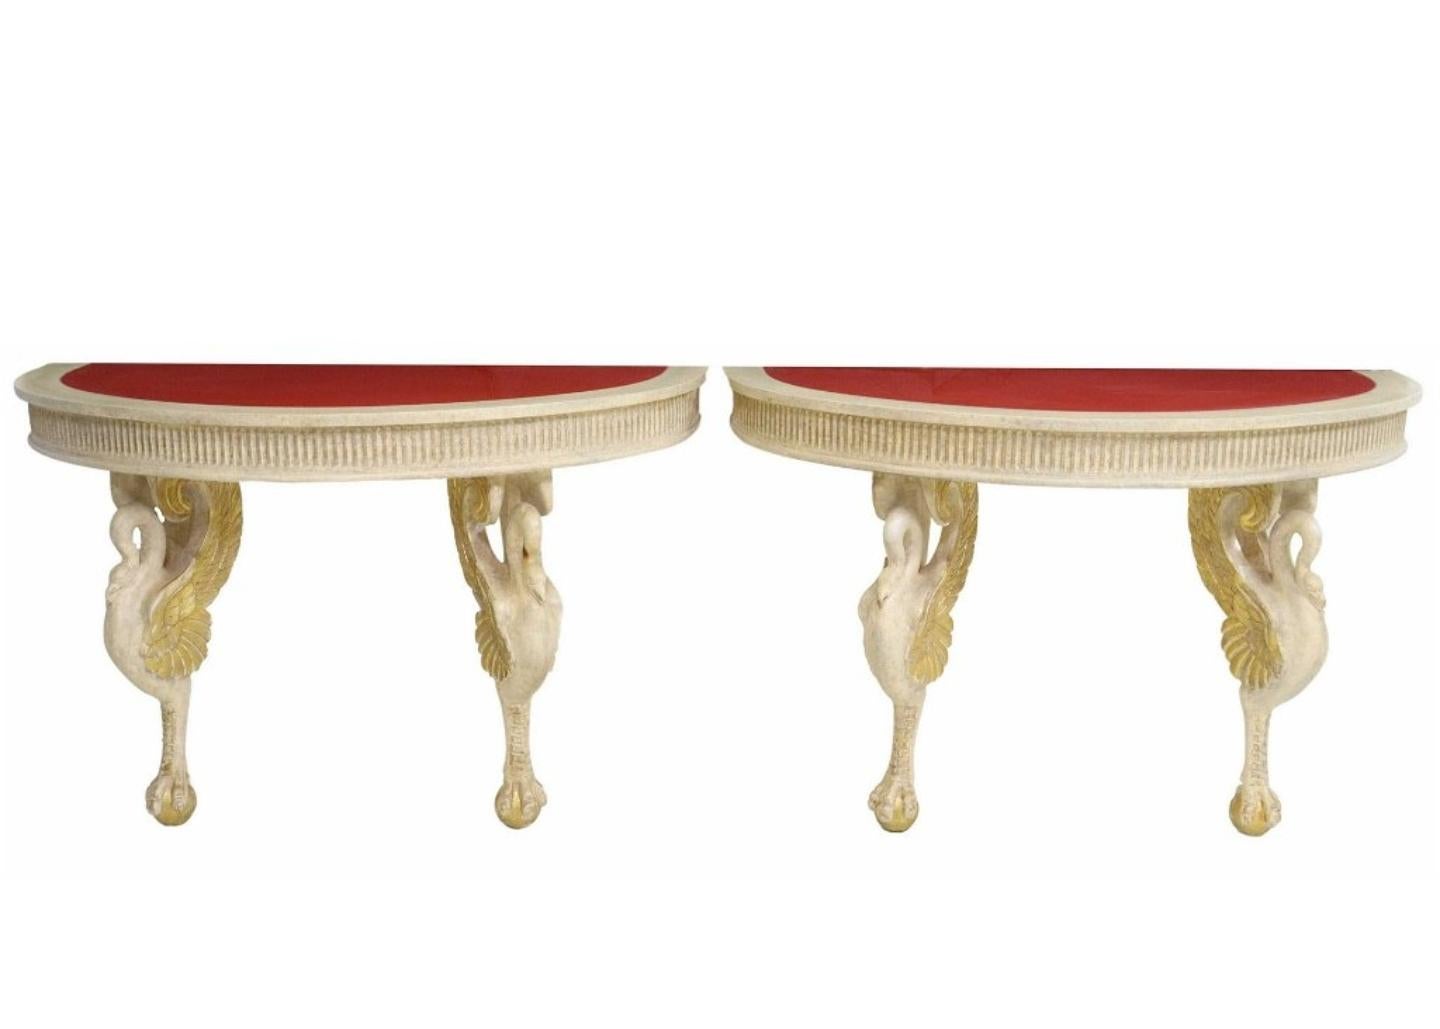 A fabulous pair of French Empire style demilune paint-decorated wood console tables by iconic Parisian luxury design house Maison Jansen (Paris, France; 1880-1989)

Finished in Mid-20th Century glitz and glam Hollywood Regency taste, the rare,